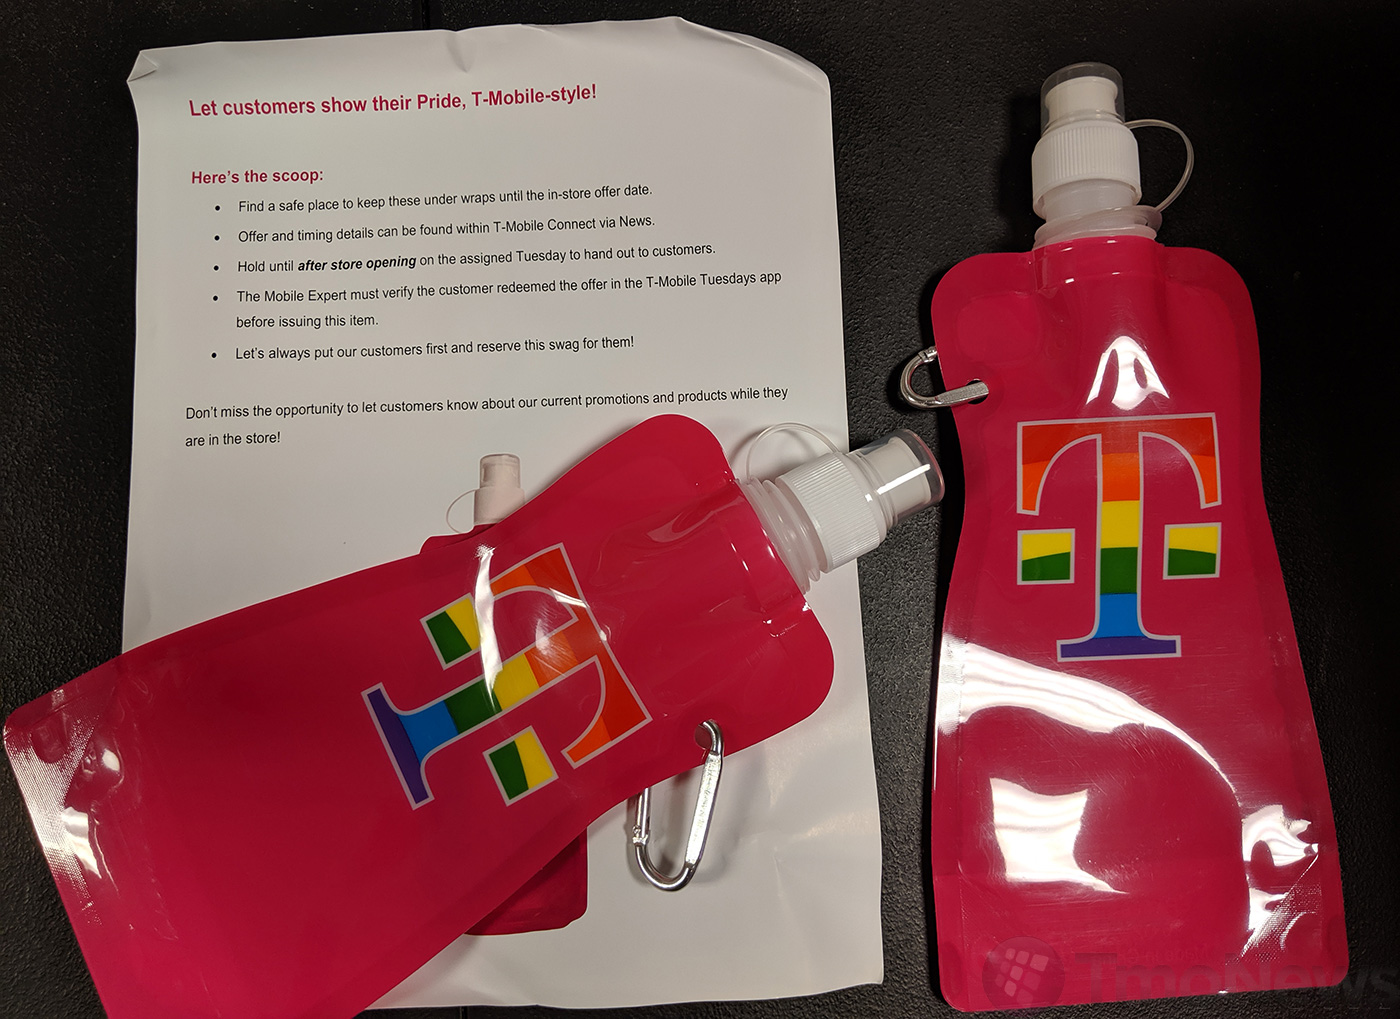 TMobile Tuesdays will soon offer free Pride water bottles to customers